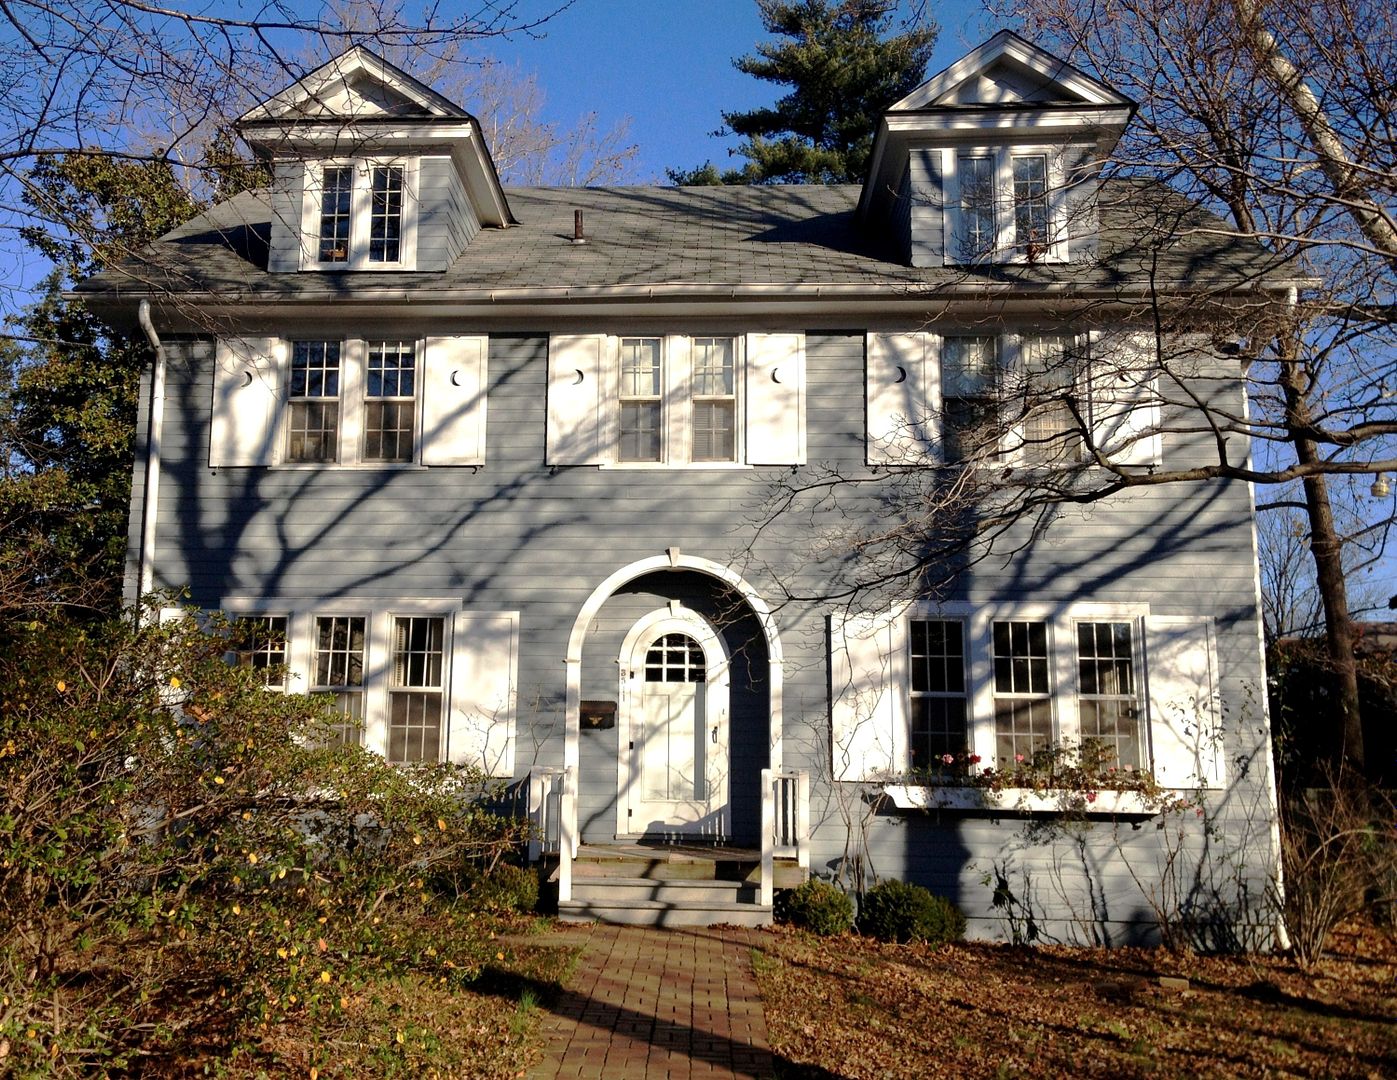 The Preston is a very rare Sears kit home, but Catarina Bannier found one in the Washington DC area. 